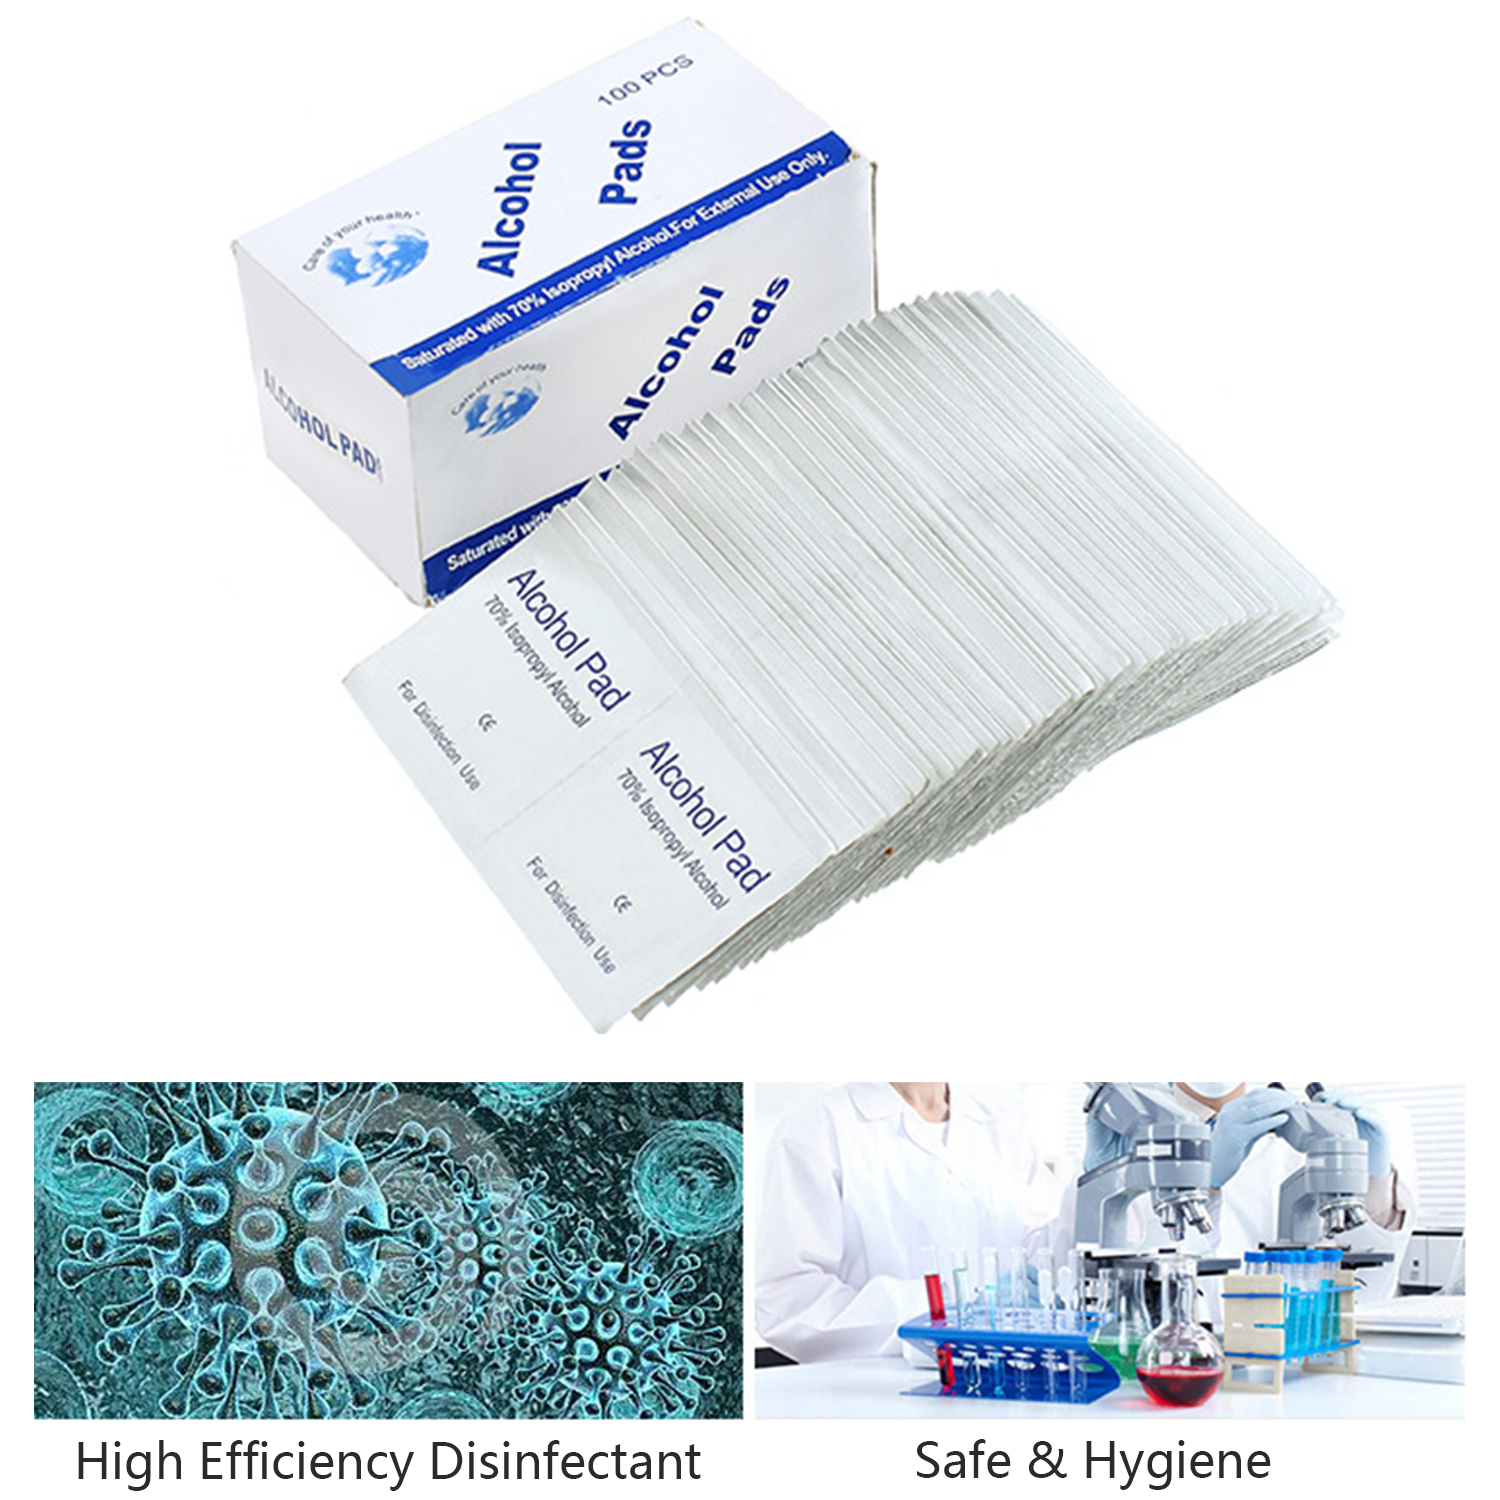 100-Pcs-70-Alcohol-Wet-Wipe-Disposable-Disinfection-Prep-Swap-Pad-Antiseptic-Skin-Cleaning-Cloths-He-1650270-4